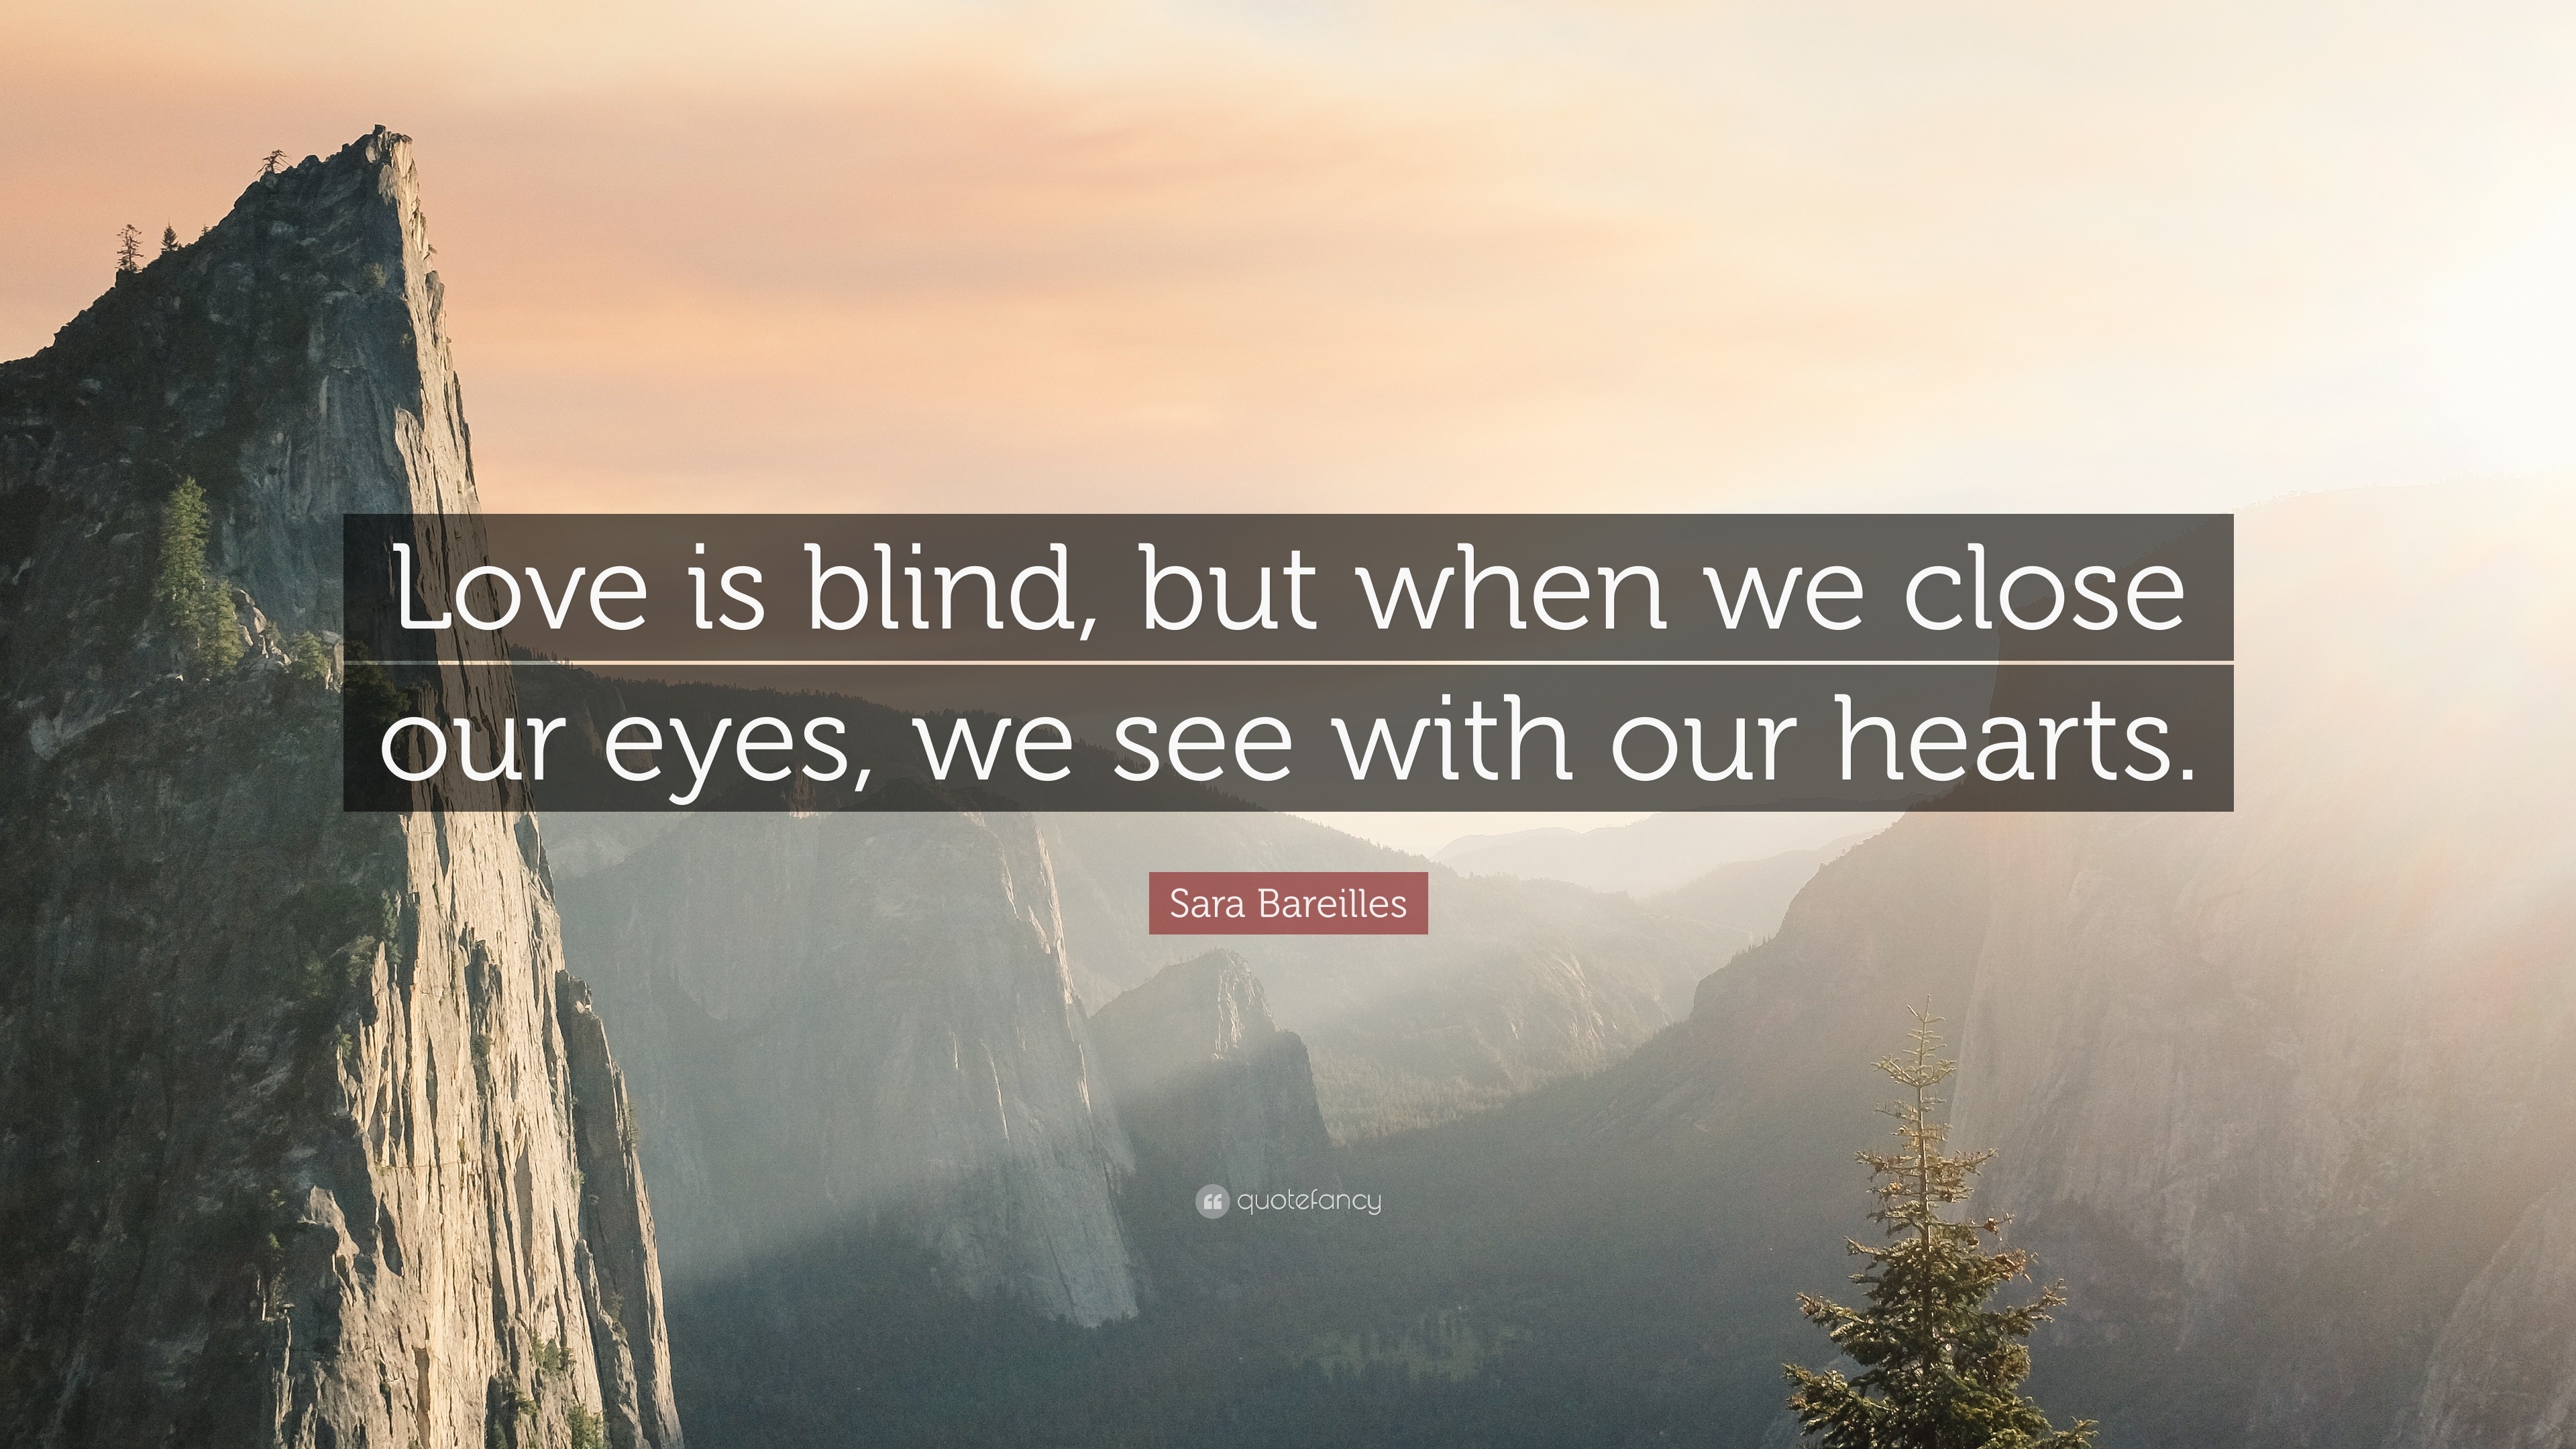 Sara Bareilles Quote: “Love is blind, but when we close our eyes, we ...